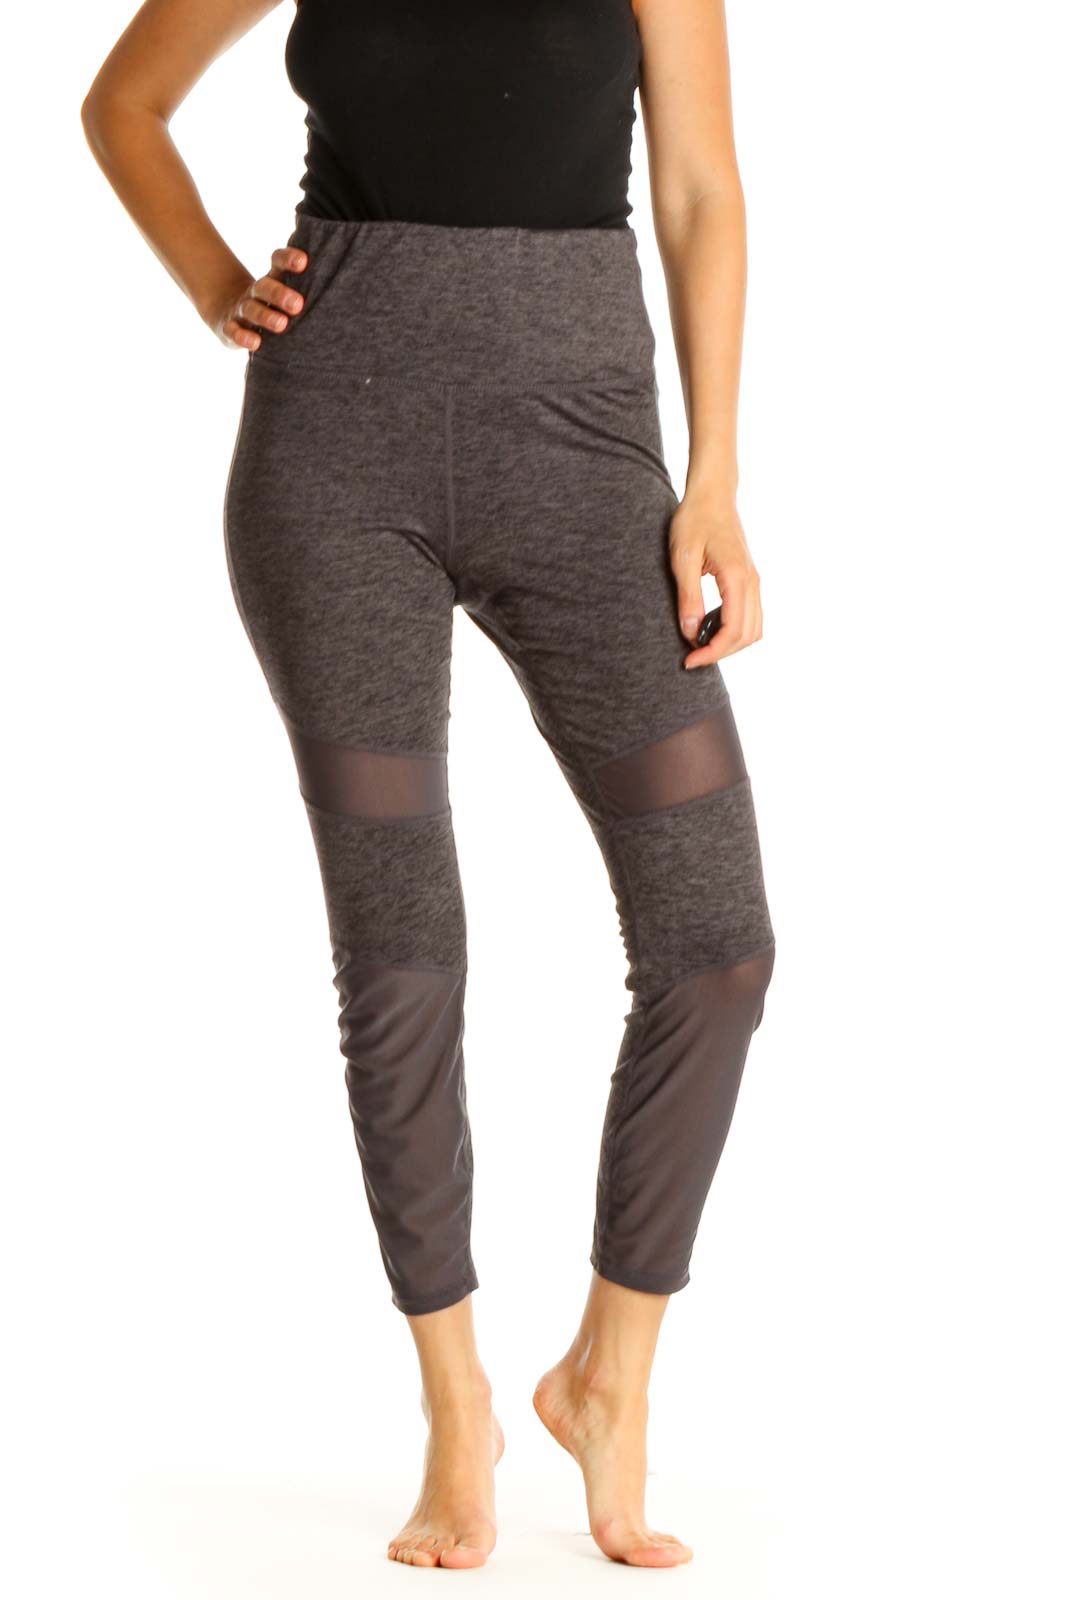 Gaiam - Gray Textured All Day Wear Leggings Polyester Spandex